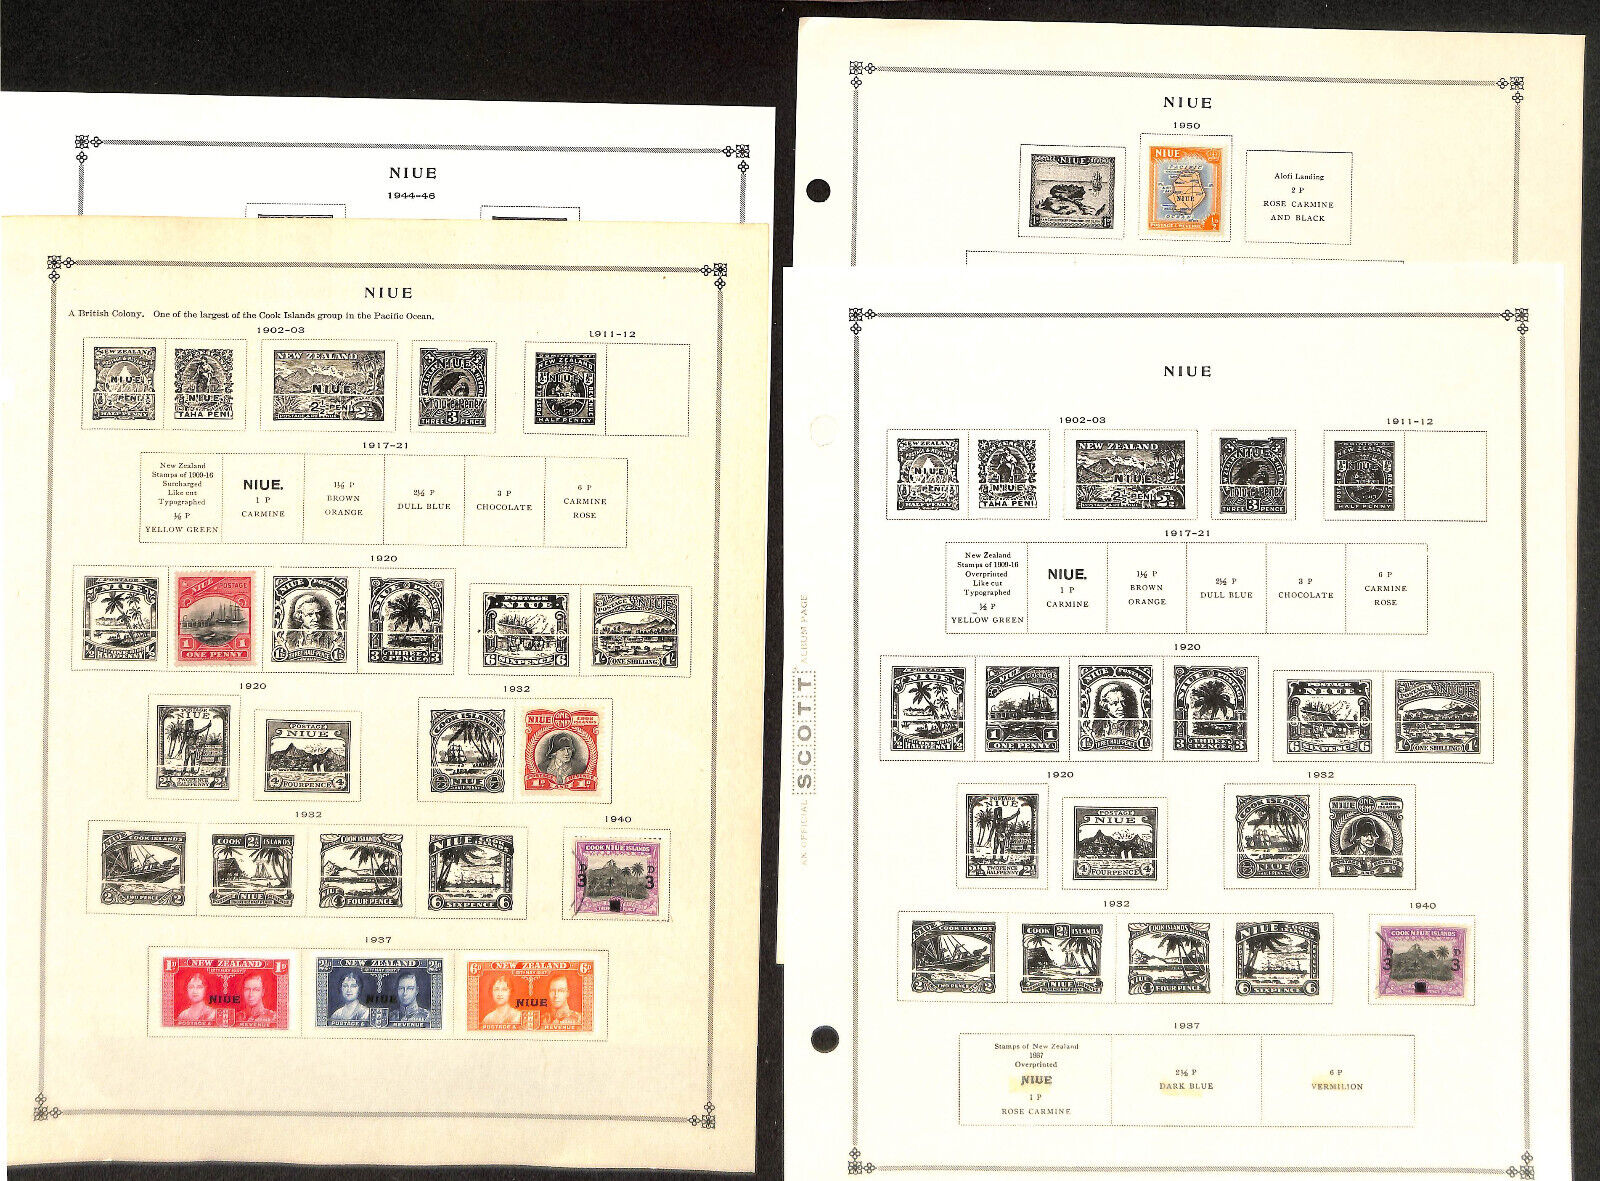 Niue Stamp Collection on 6 Scott International Pages, 1902-1950